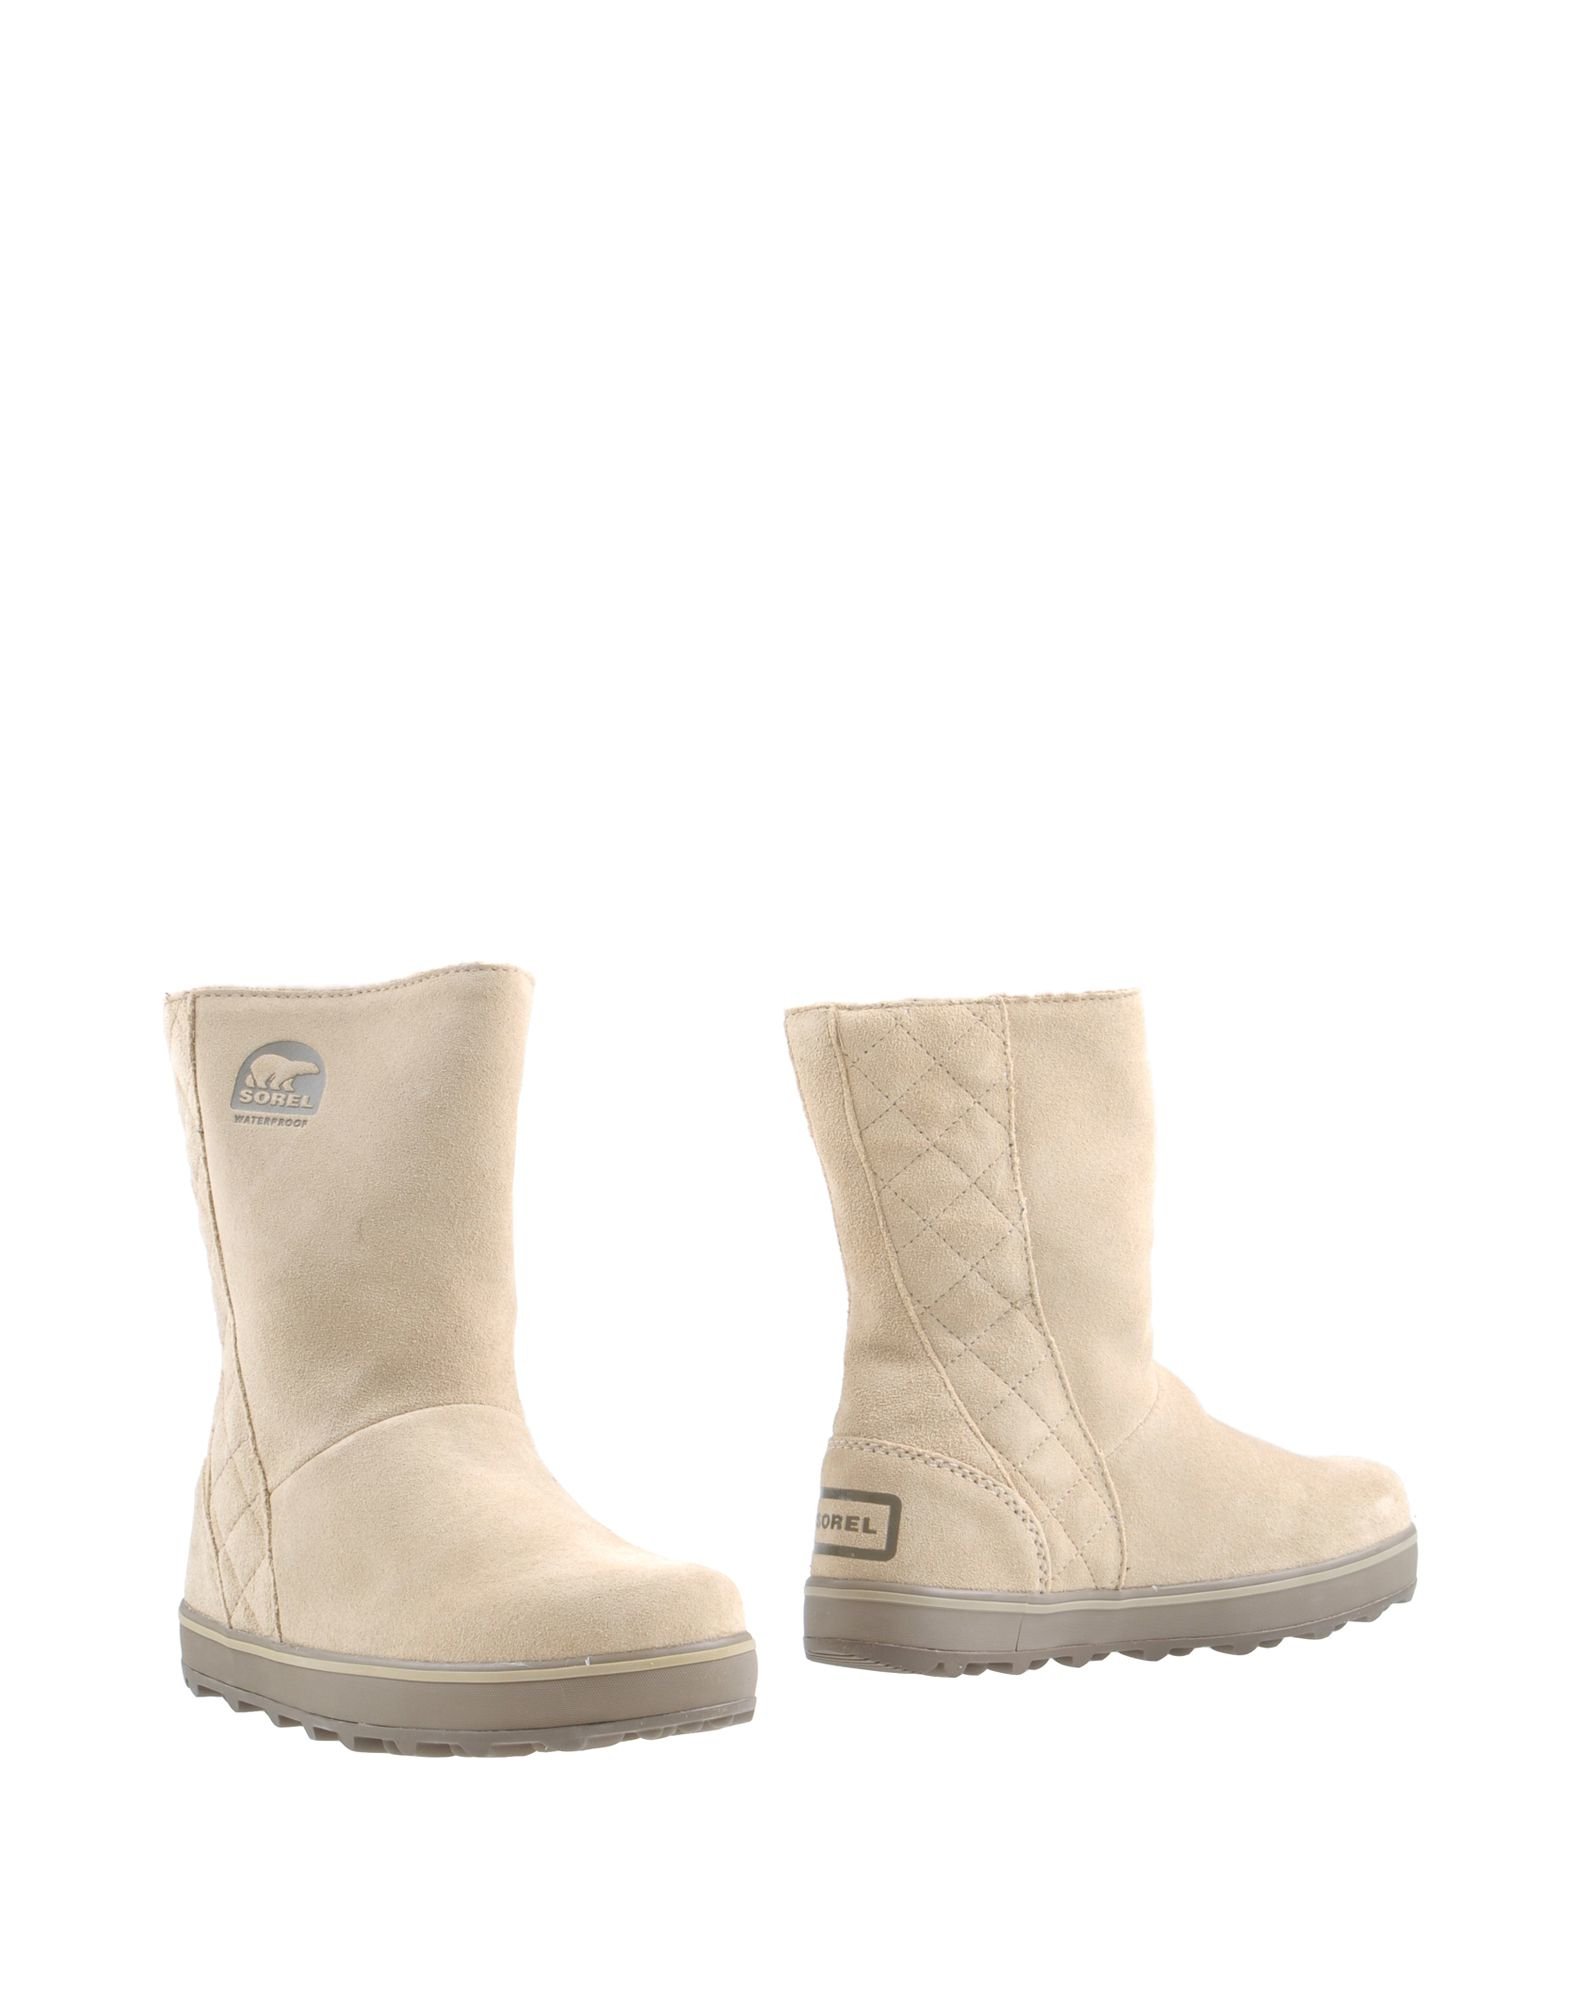 Lyst - Sorel Ankle Boots in Natural